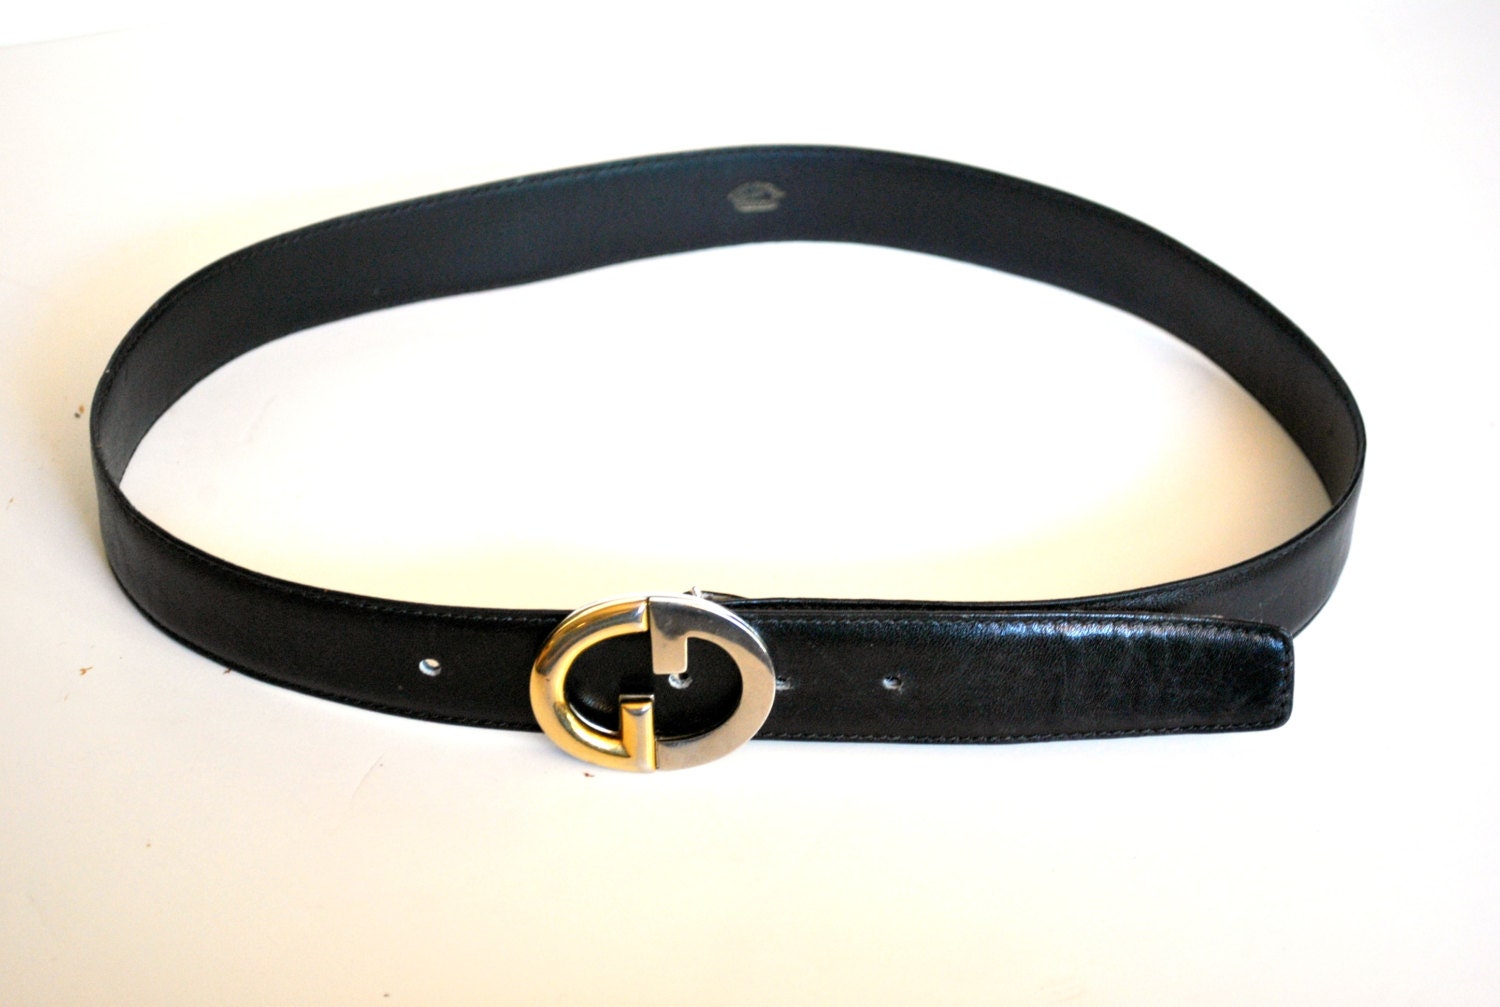 80s Gucci Leather Belt with Double G Logo / Black by miskabelle